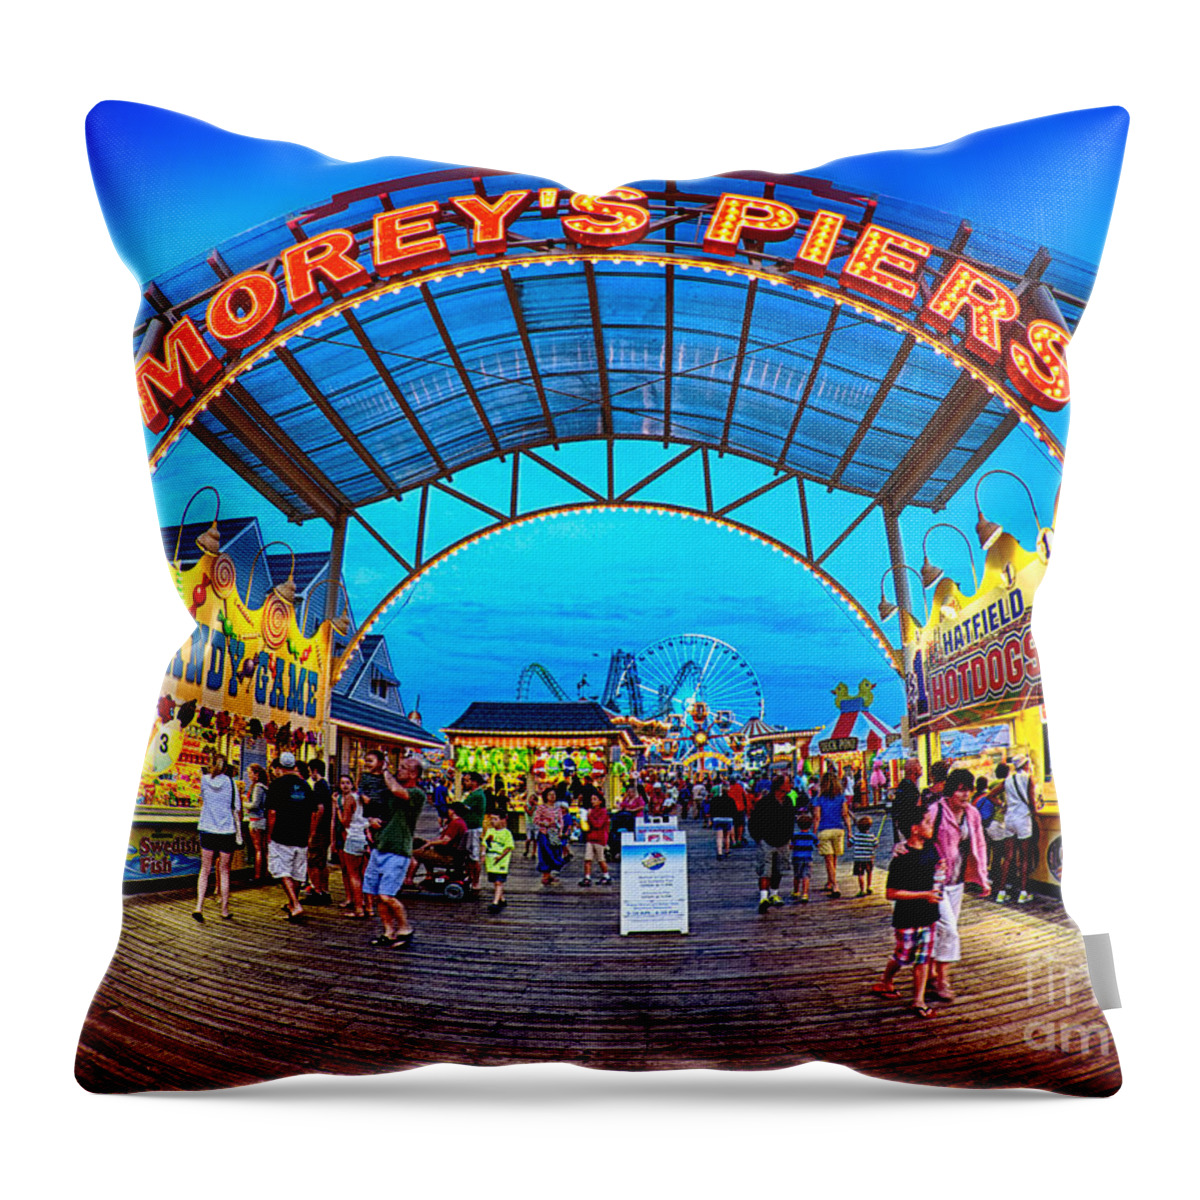 156 Foot Tall Throw Pillow featuring the photograph Moreys Piers in Wildwood by Mark Miller